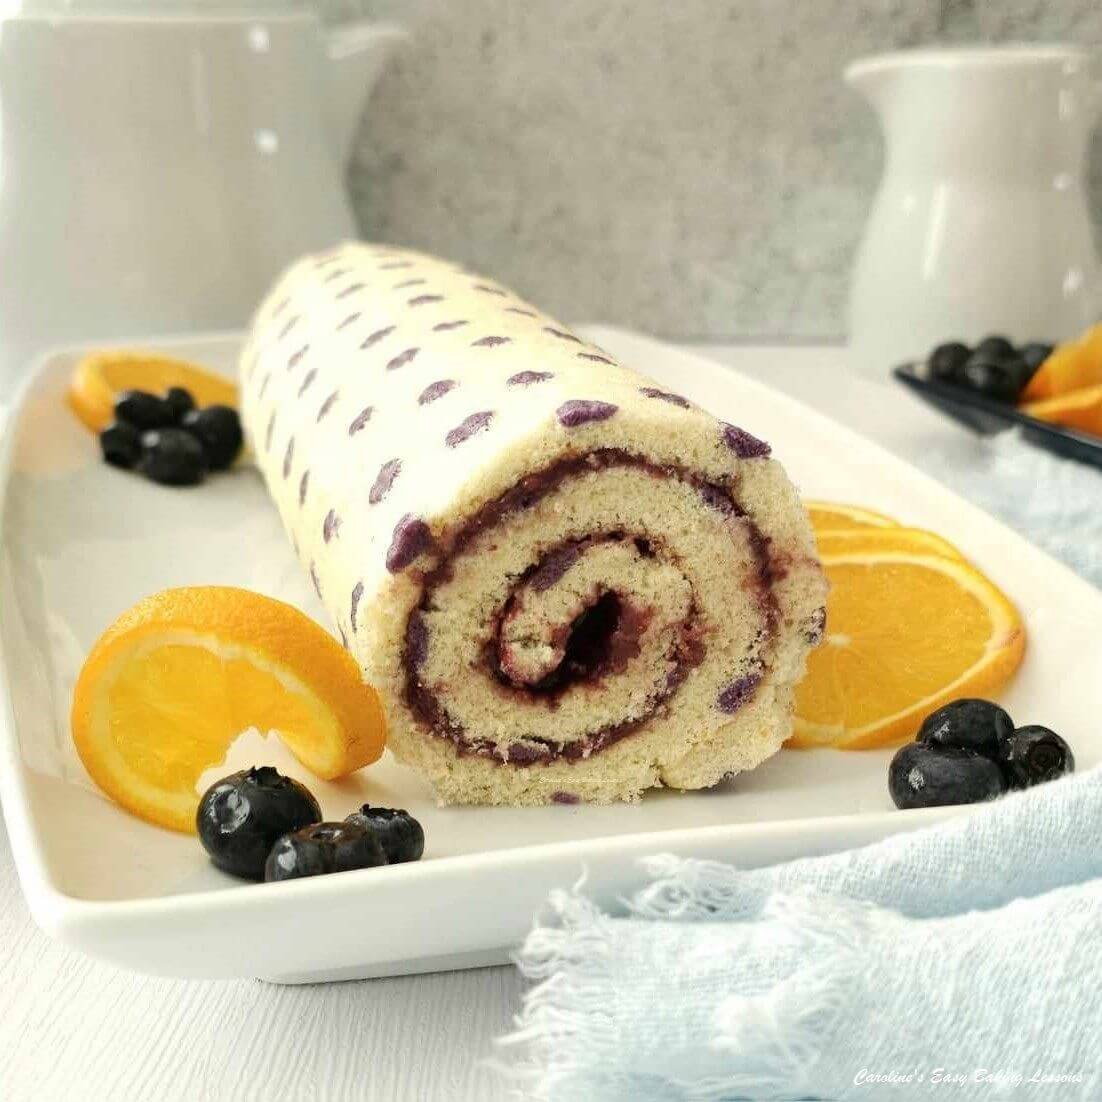 45 degree Shot of end of a purple dot patterned Swiss roll/jelly roll cake with bluberries and orange garnish.